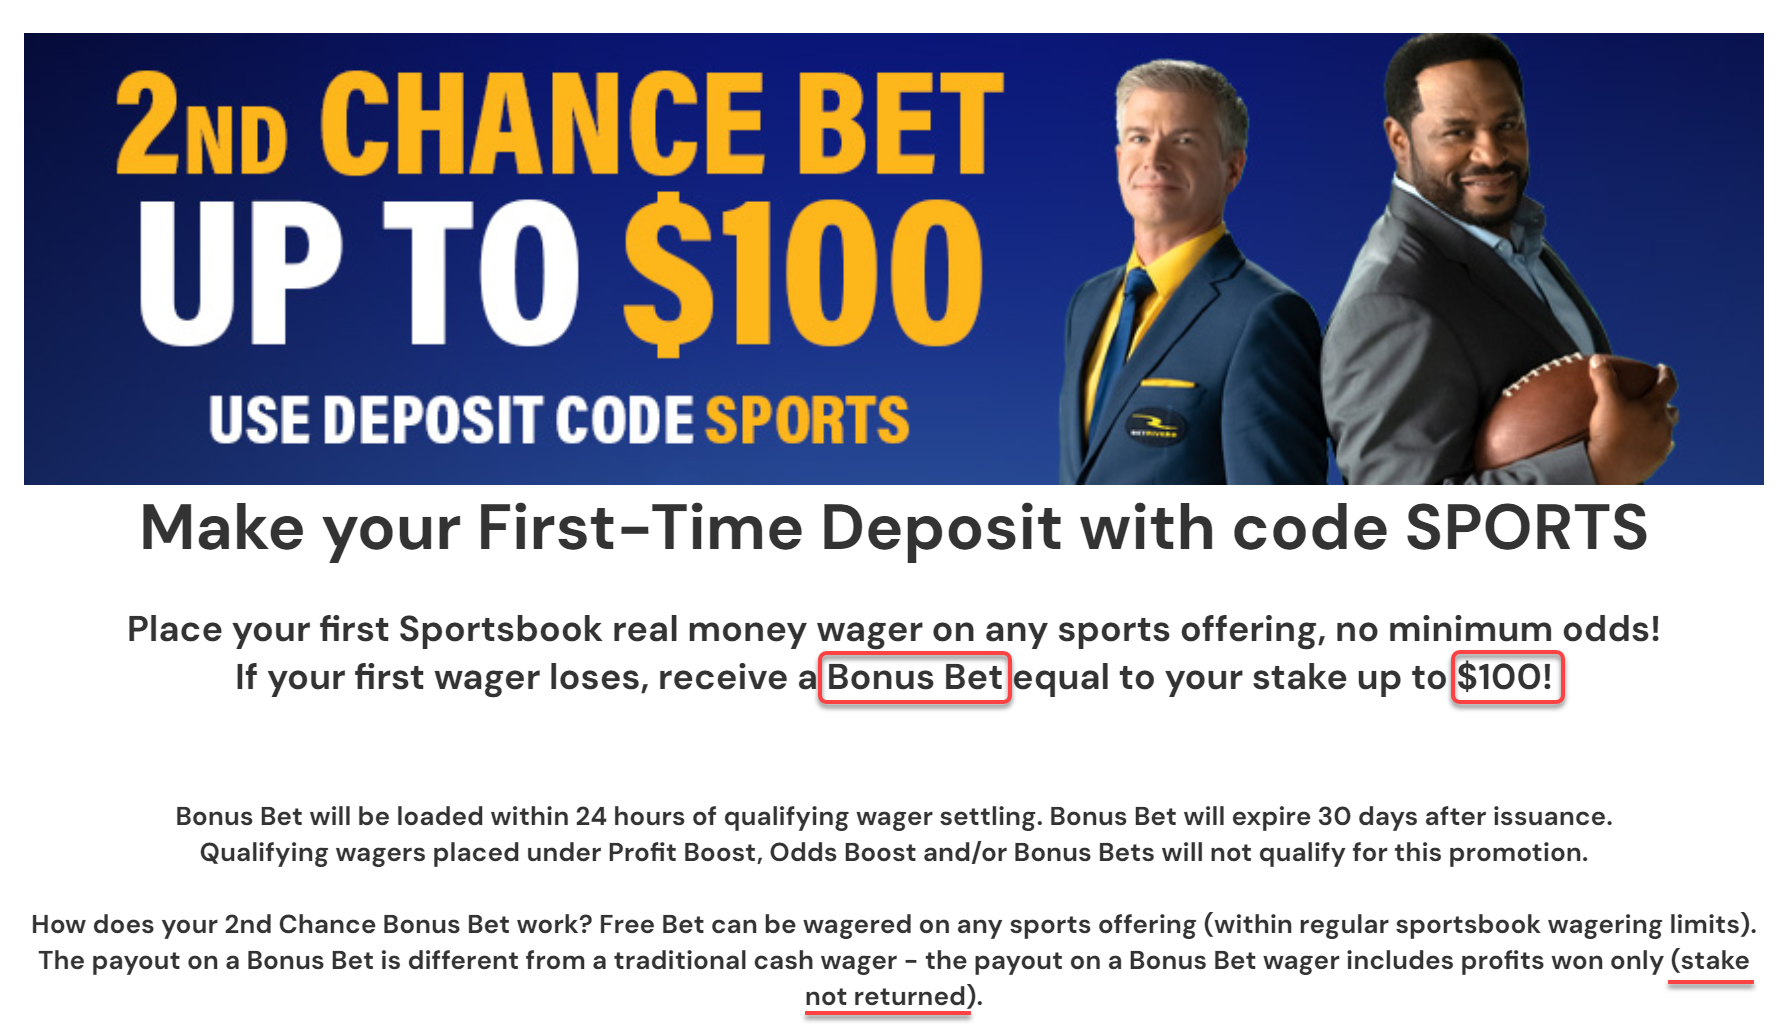 BetRivers $100 Risk Free Bet Sign-up Offer